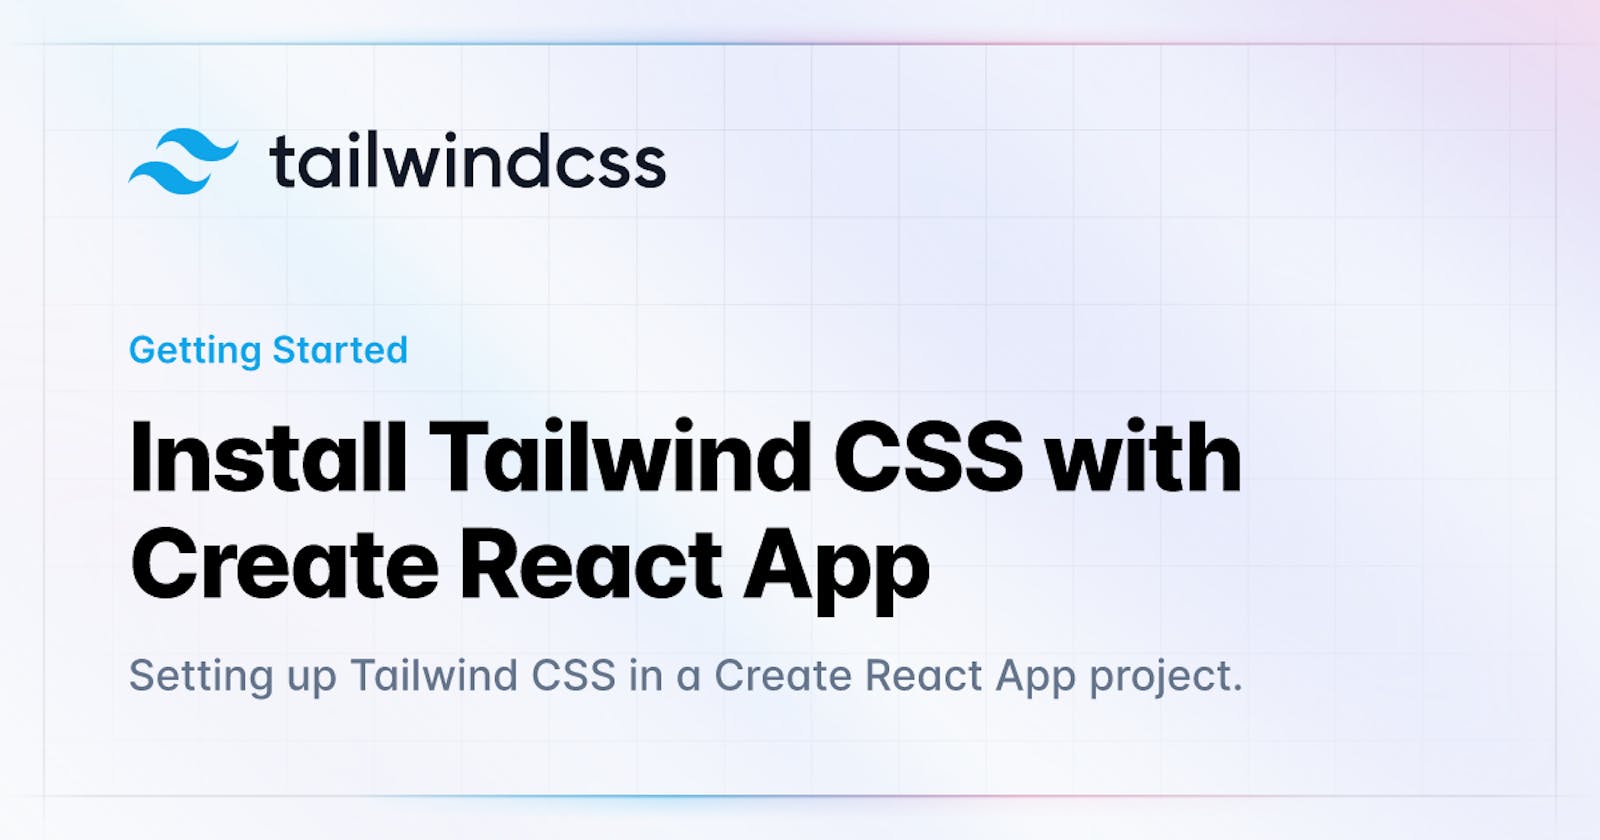 Use TailWindCSS in your react project